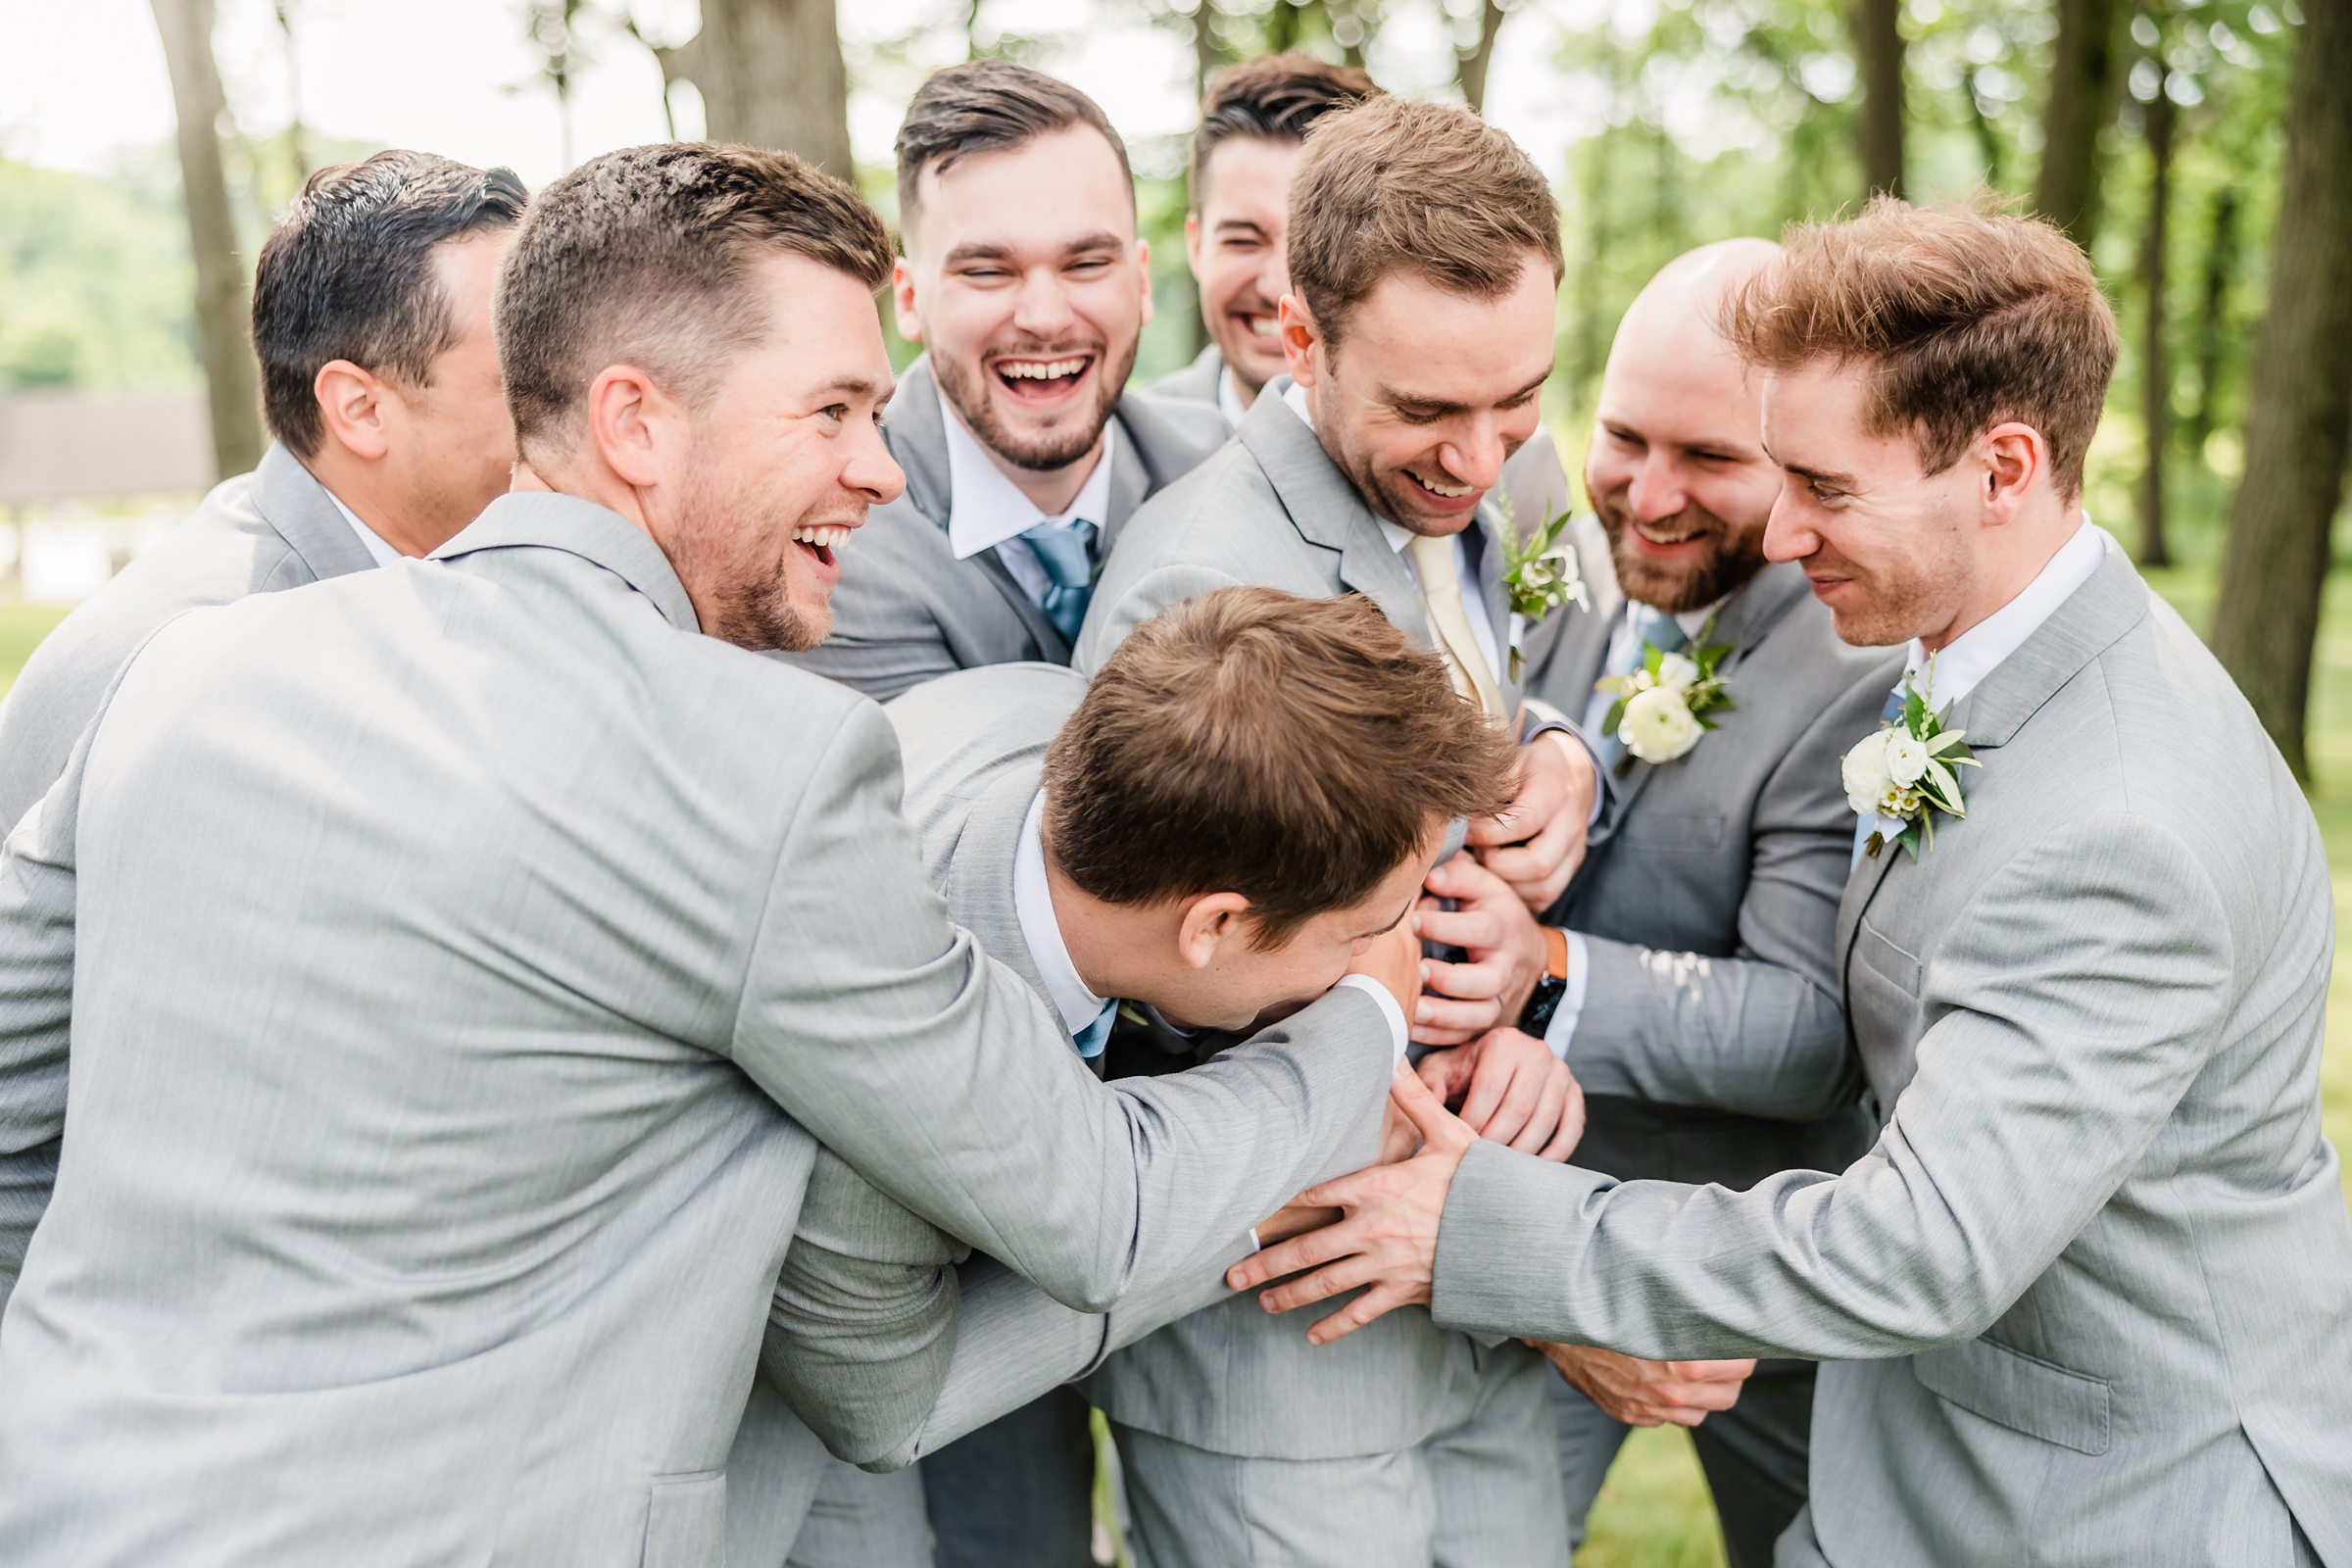 Groom with Groomsmen during a wedding at the Monte Bello Estate in Lemont, Illinois.